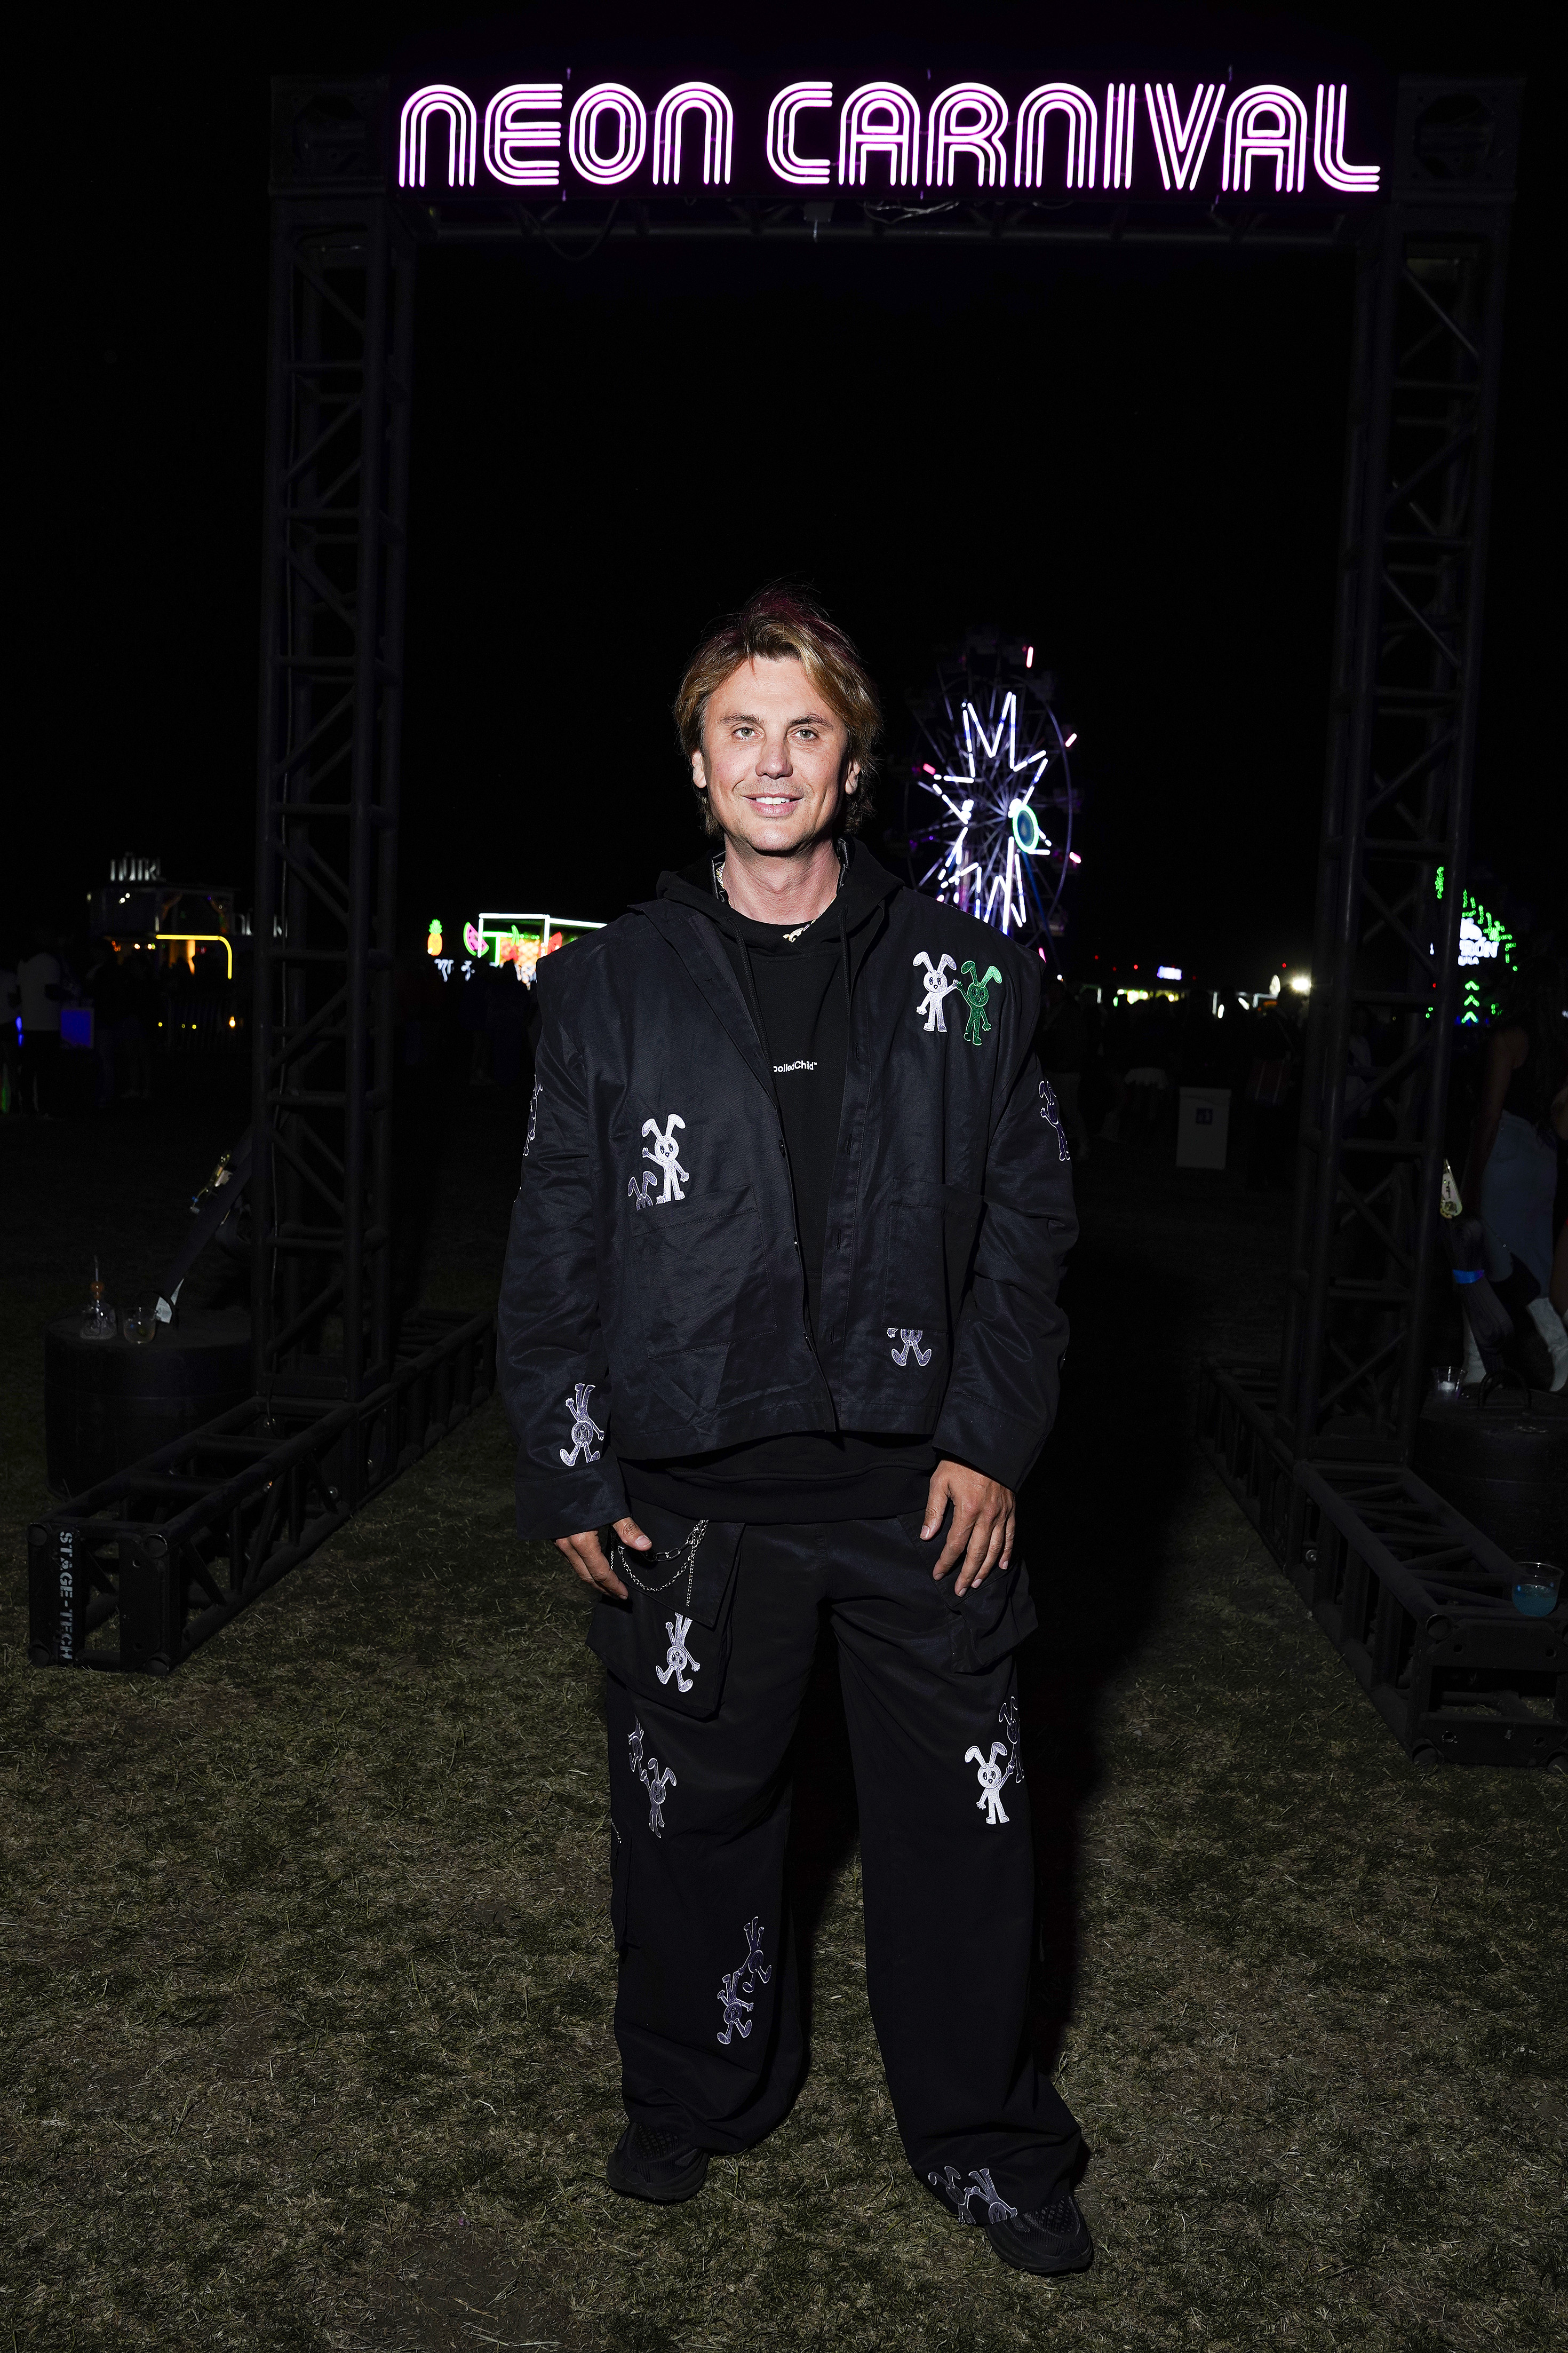 Jonathan also hit up the late-night bash Neon Carnival at Coachella last weekend